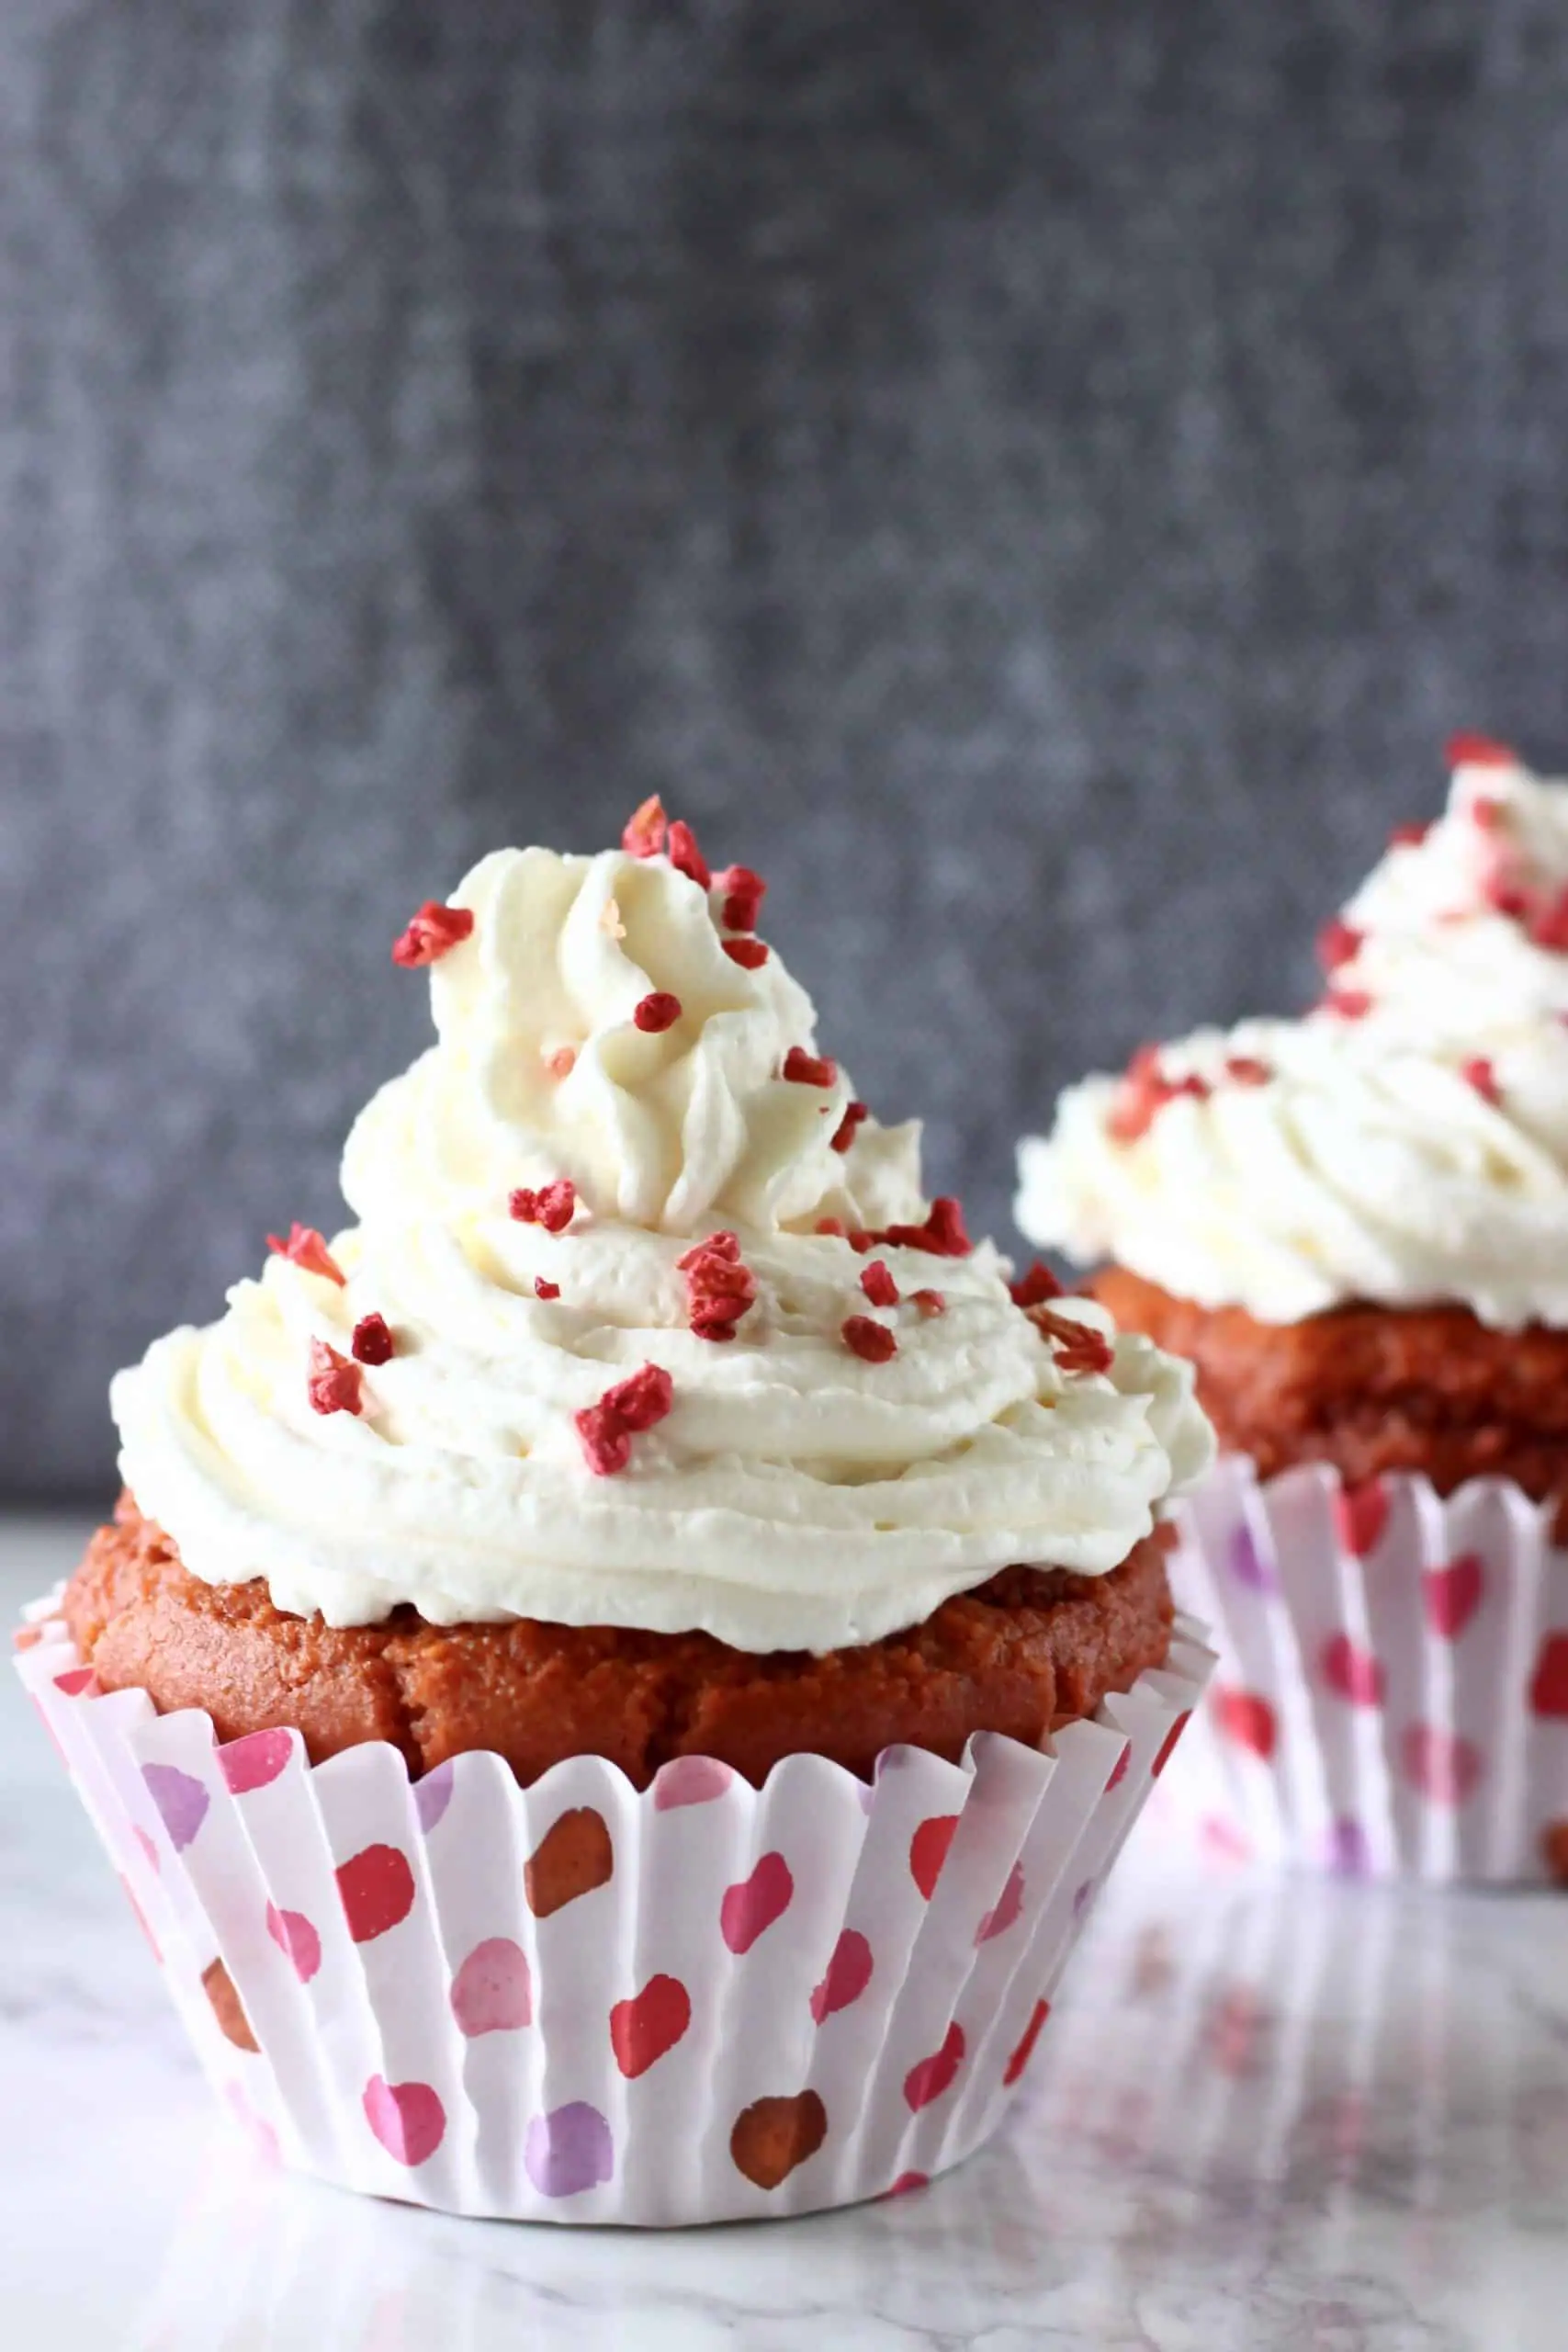 A red velvet cupcake topped with white creamy frosting sprinkled with freeze-dried raspberries on a sheet of brown baking paper